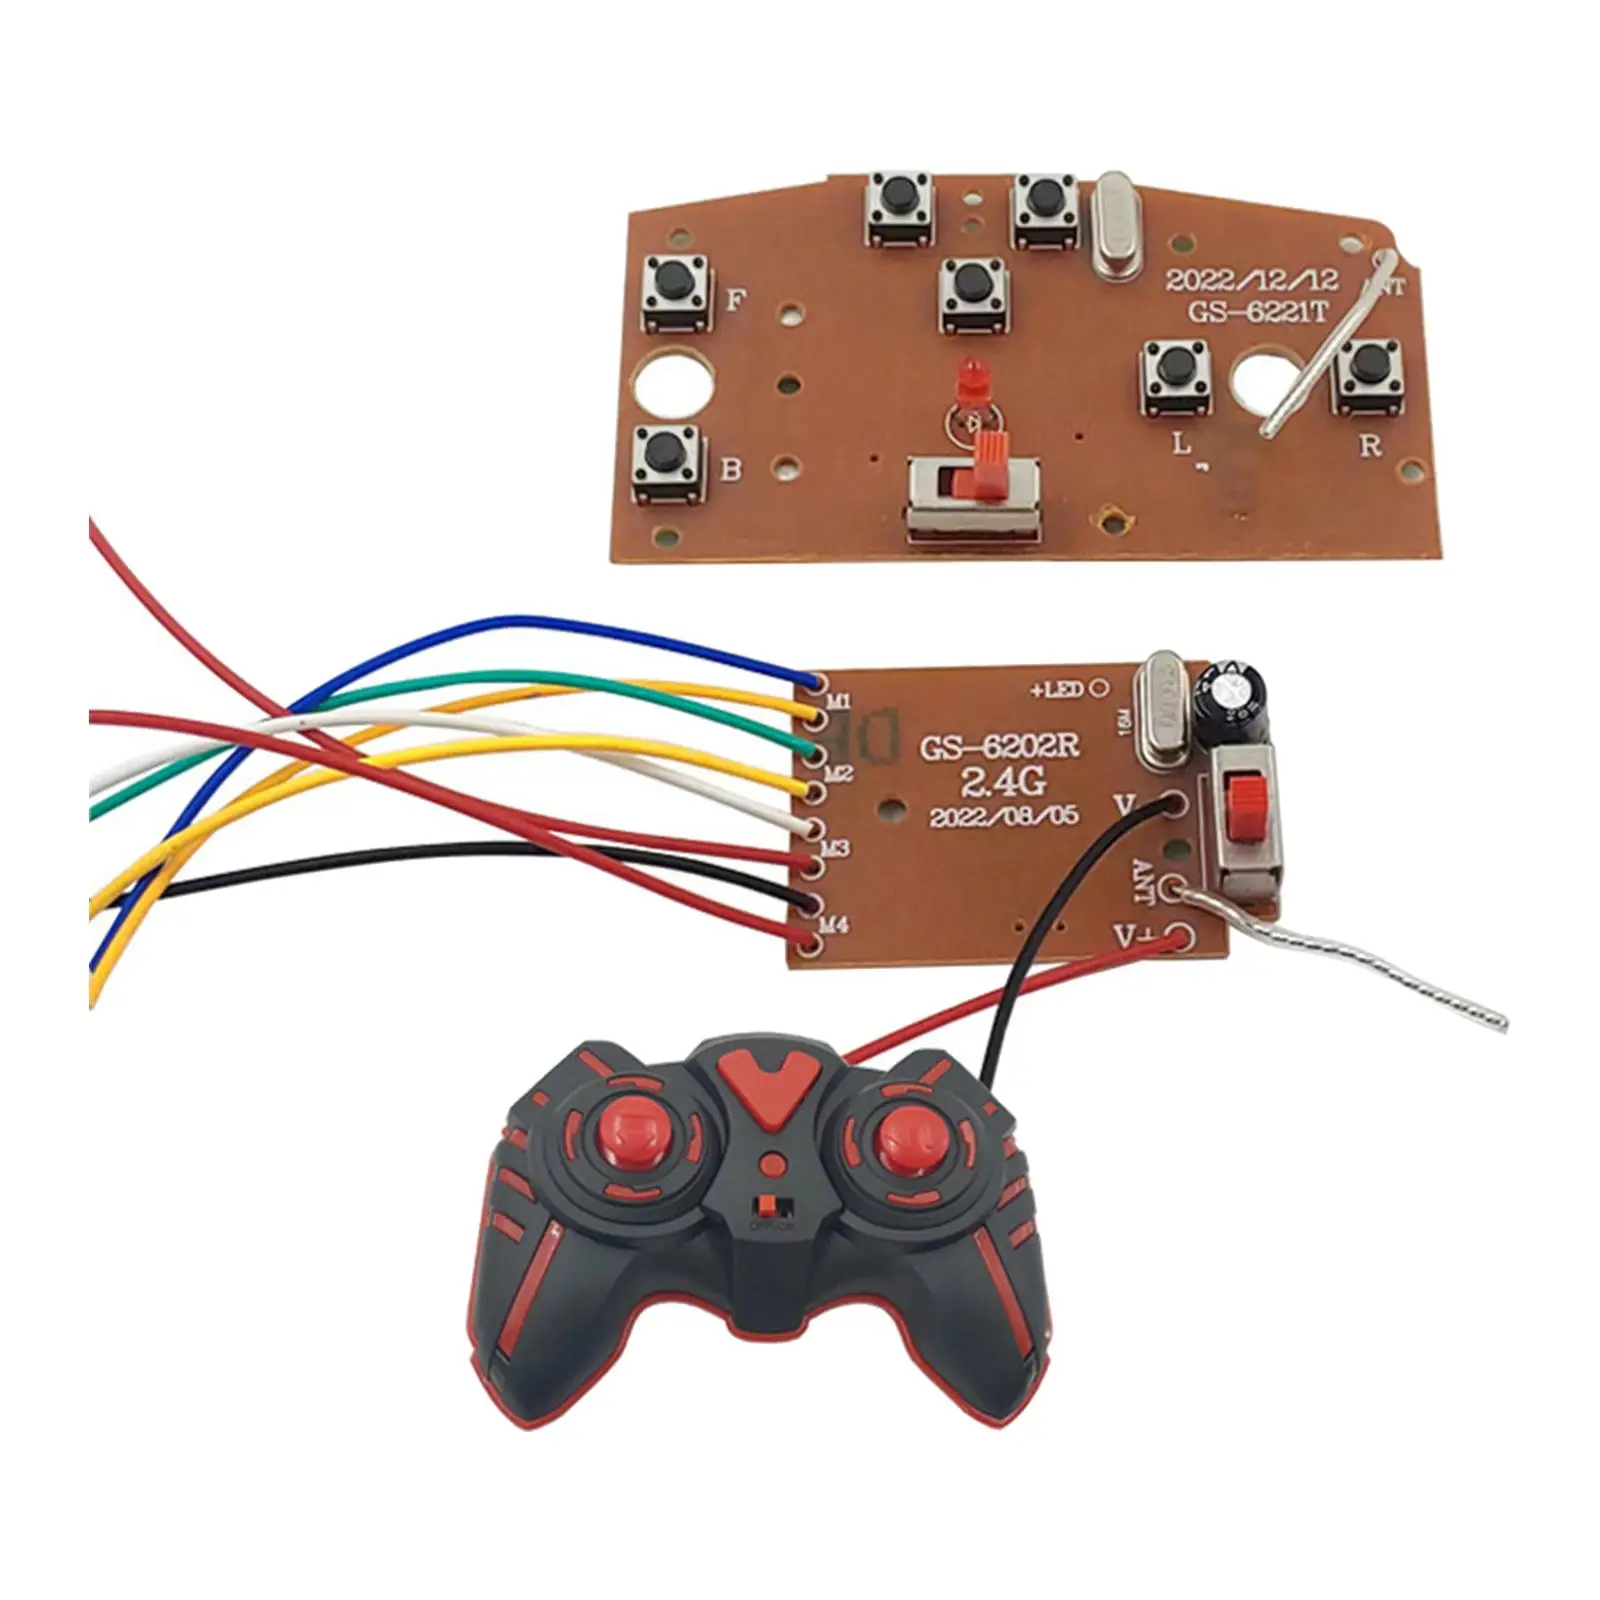 Board and Receiver Board with RC Remote Control for RC Car Boats